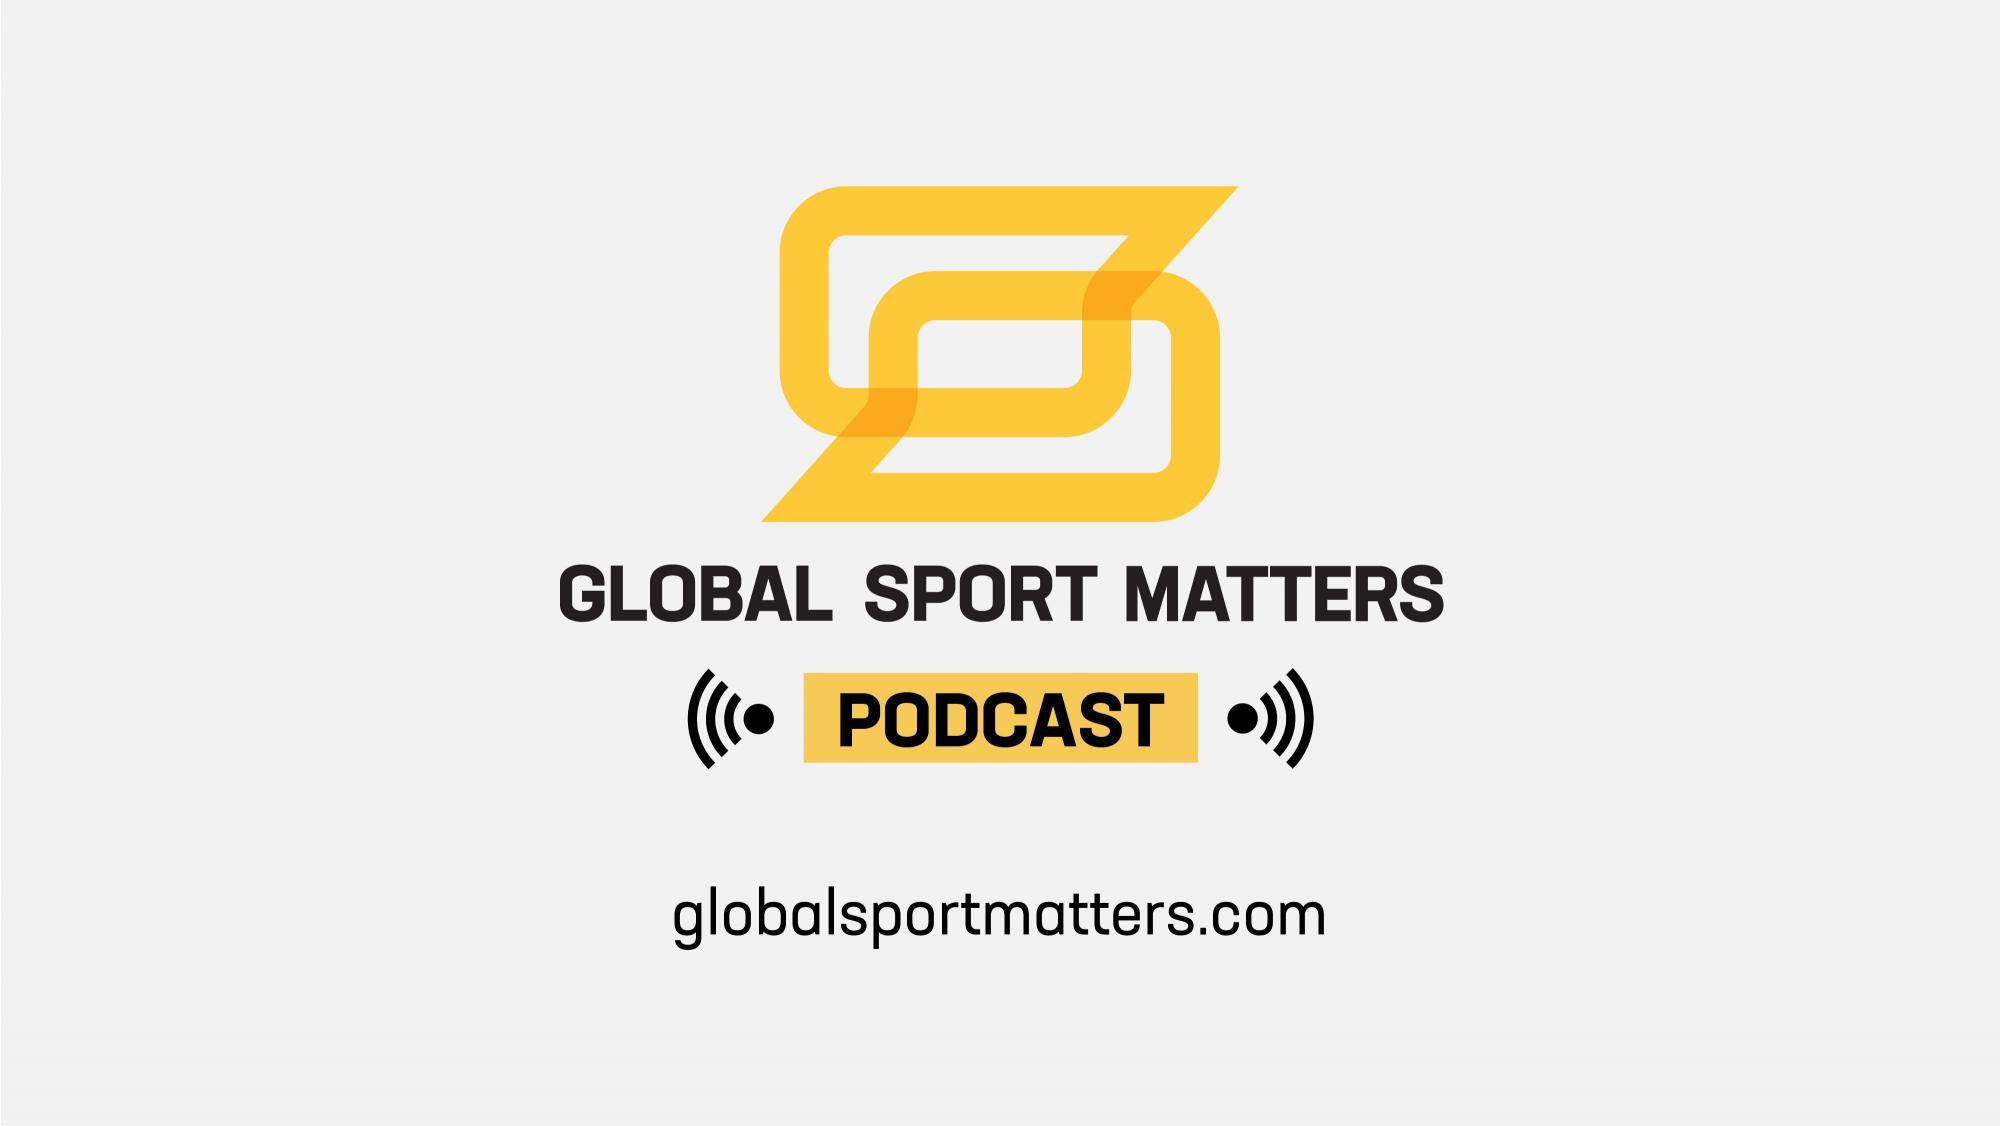 Global Sport Matters podcast